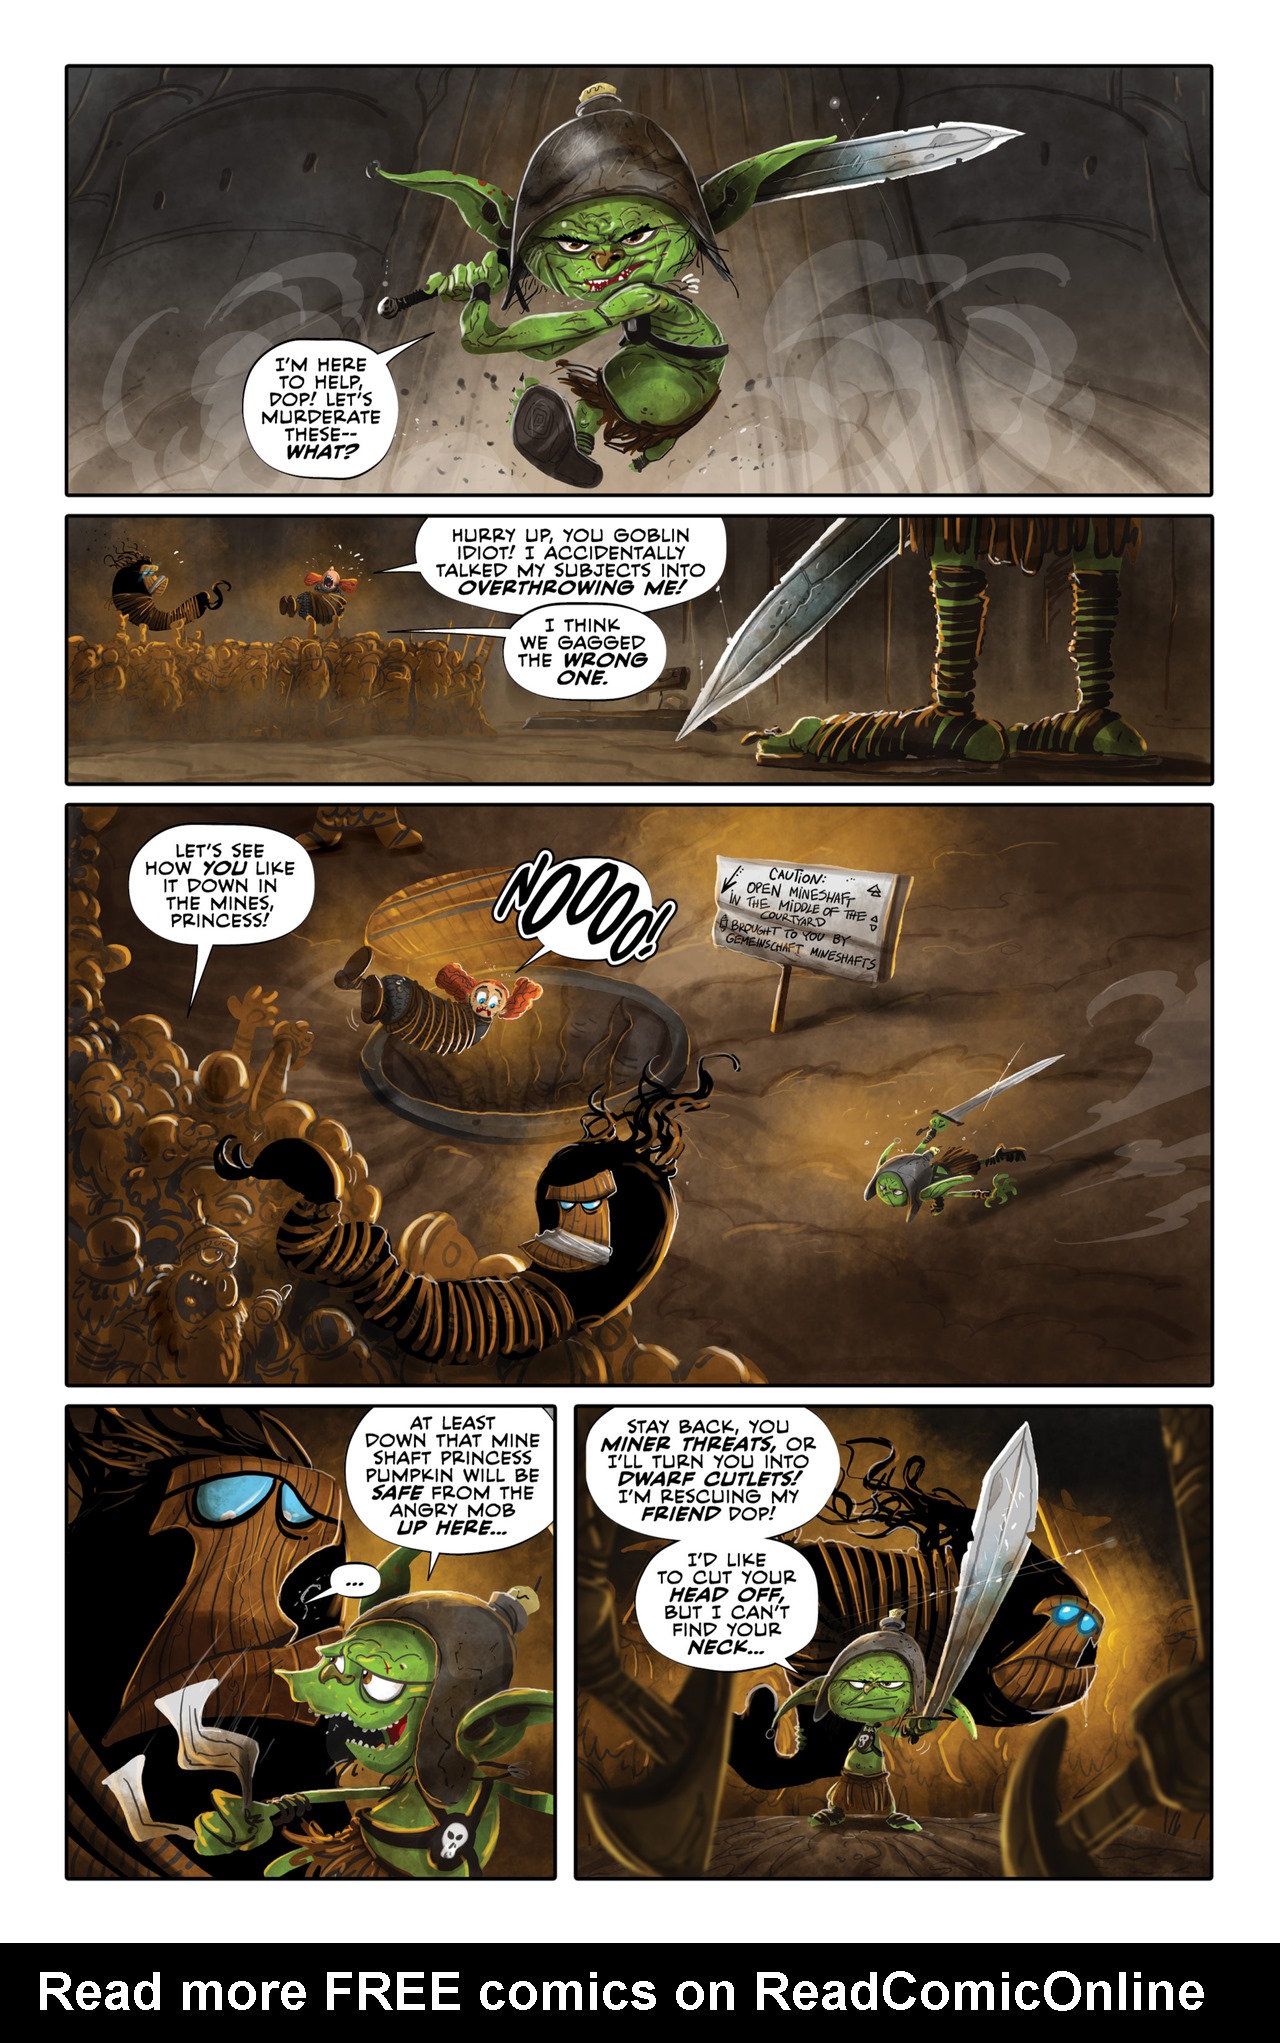 Read online Claim comic -  Issue #2 - 12